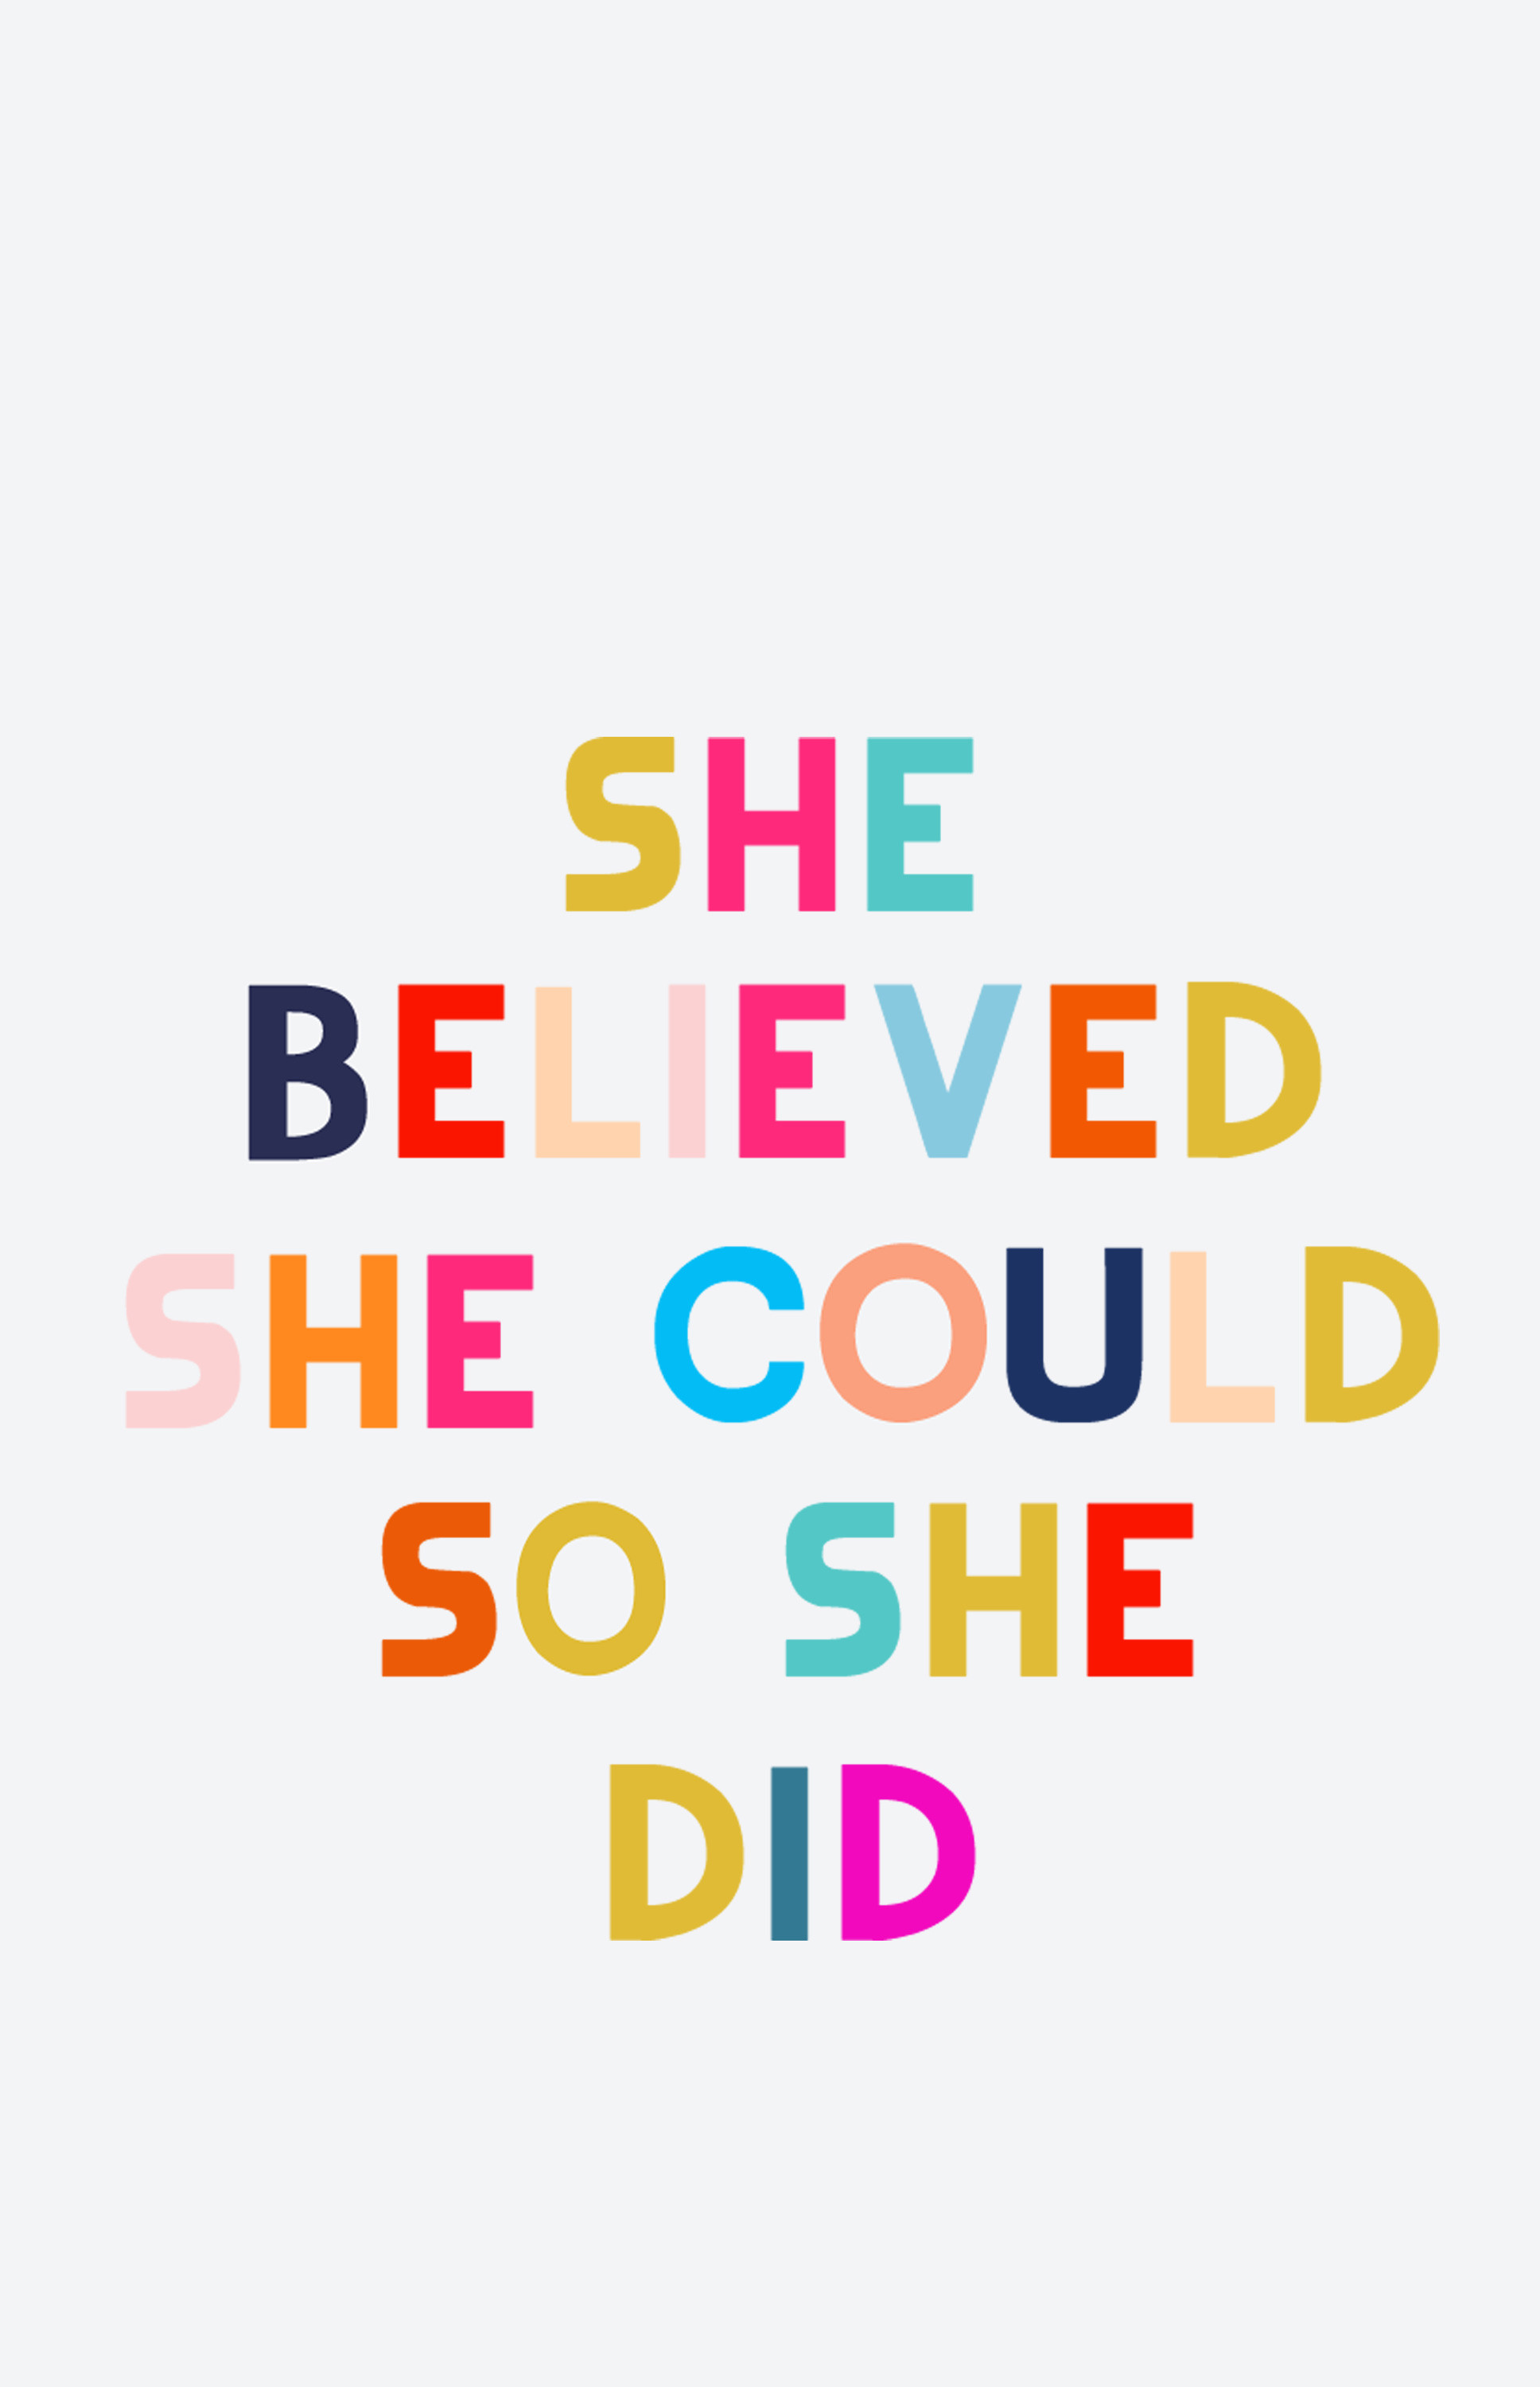 Click To Download Believed She Could So She Did Wallpaper & Background Download